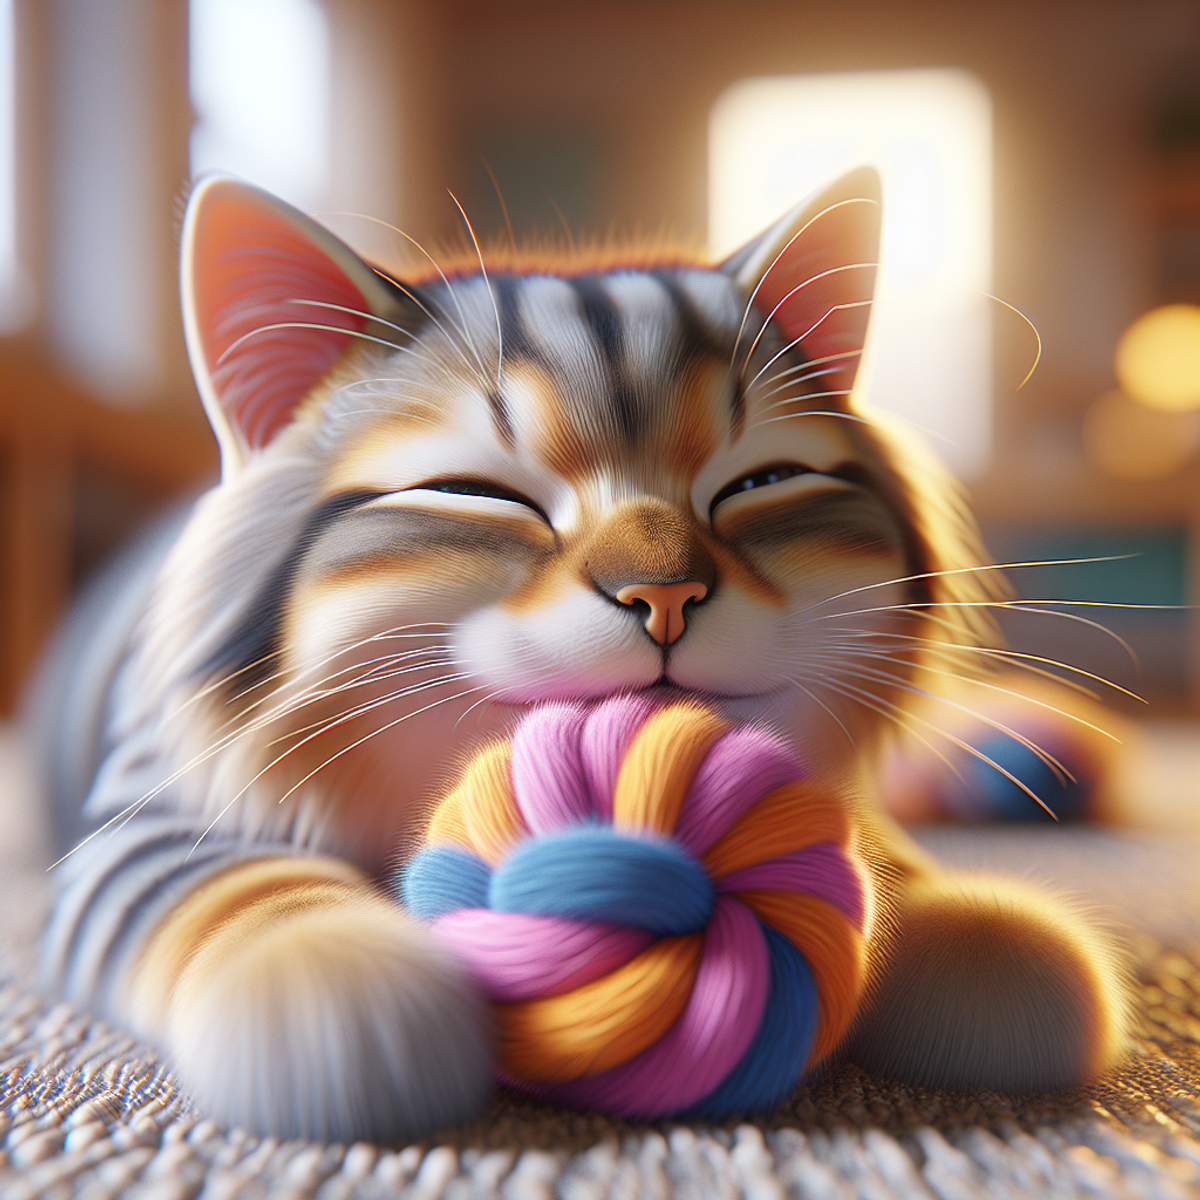 A senior cat playing with a colorful, fabric toy, looking content.